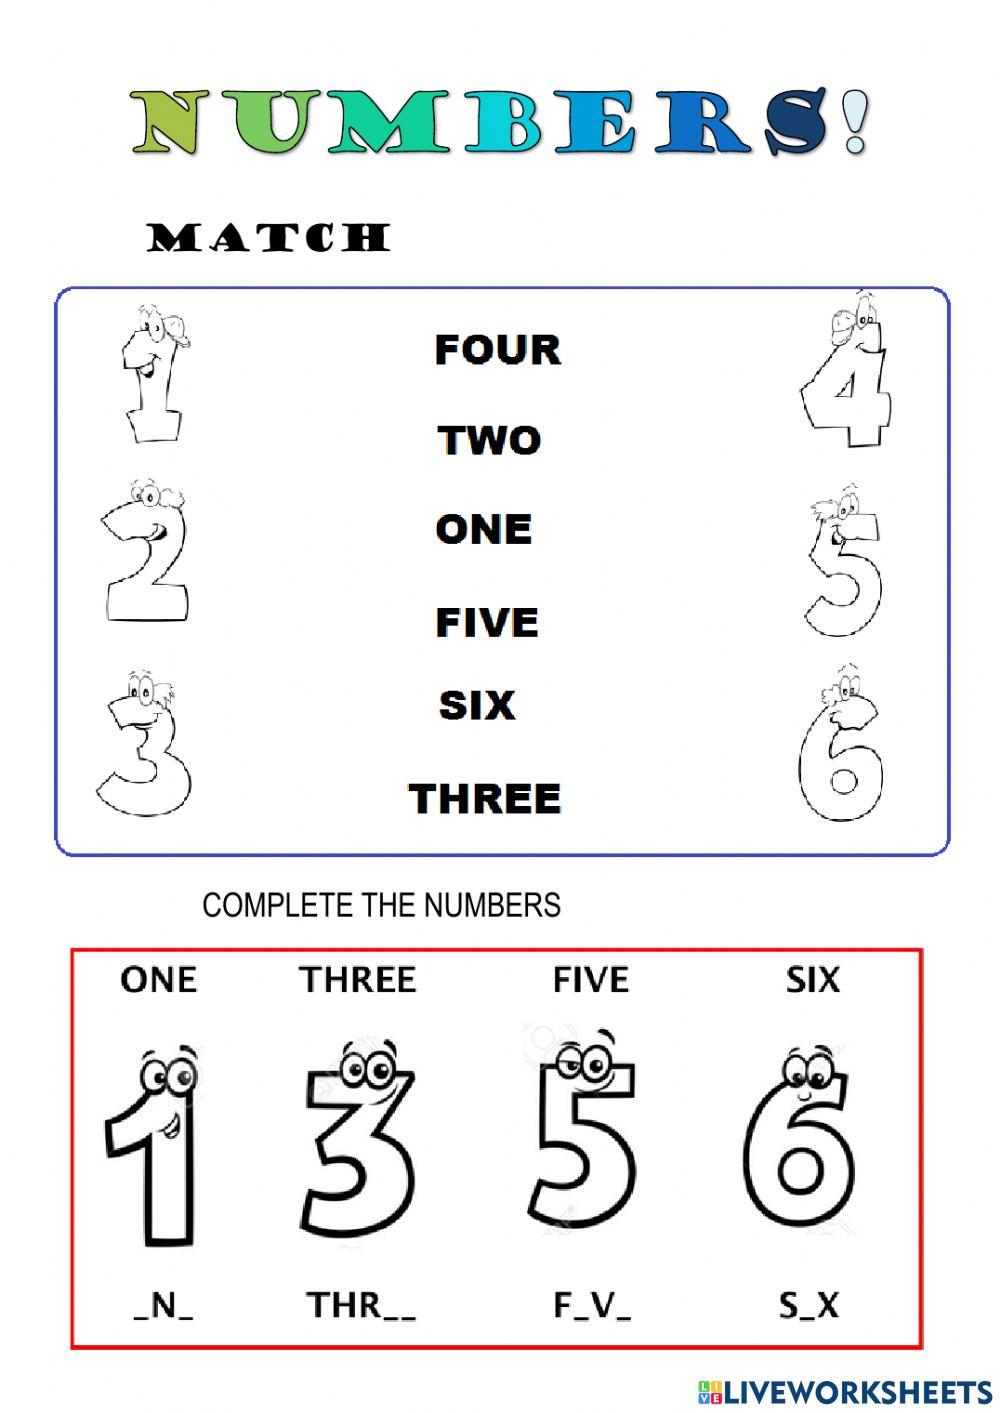 Numbers 1-6